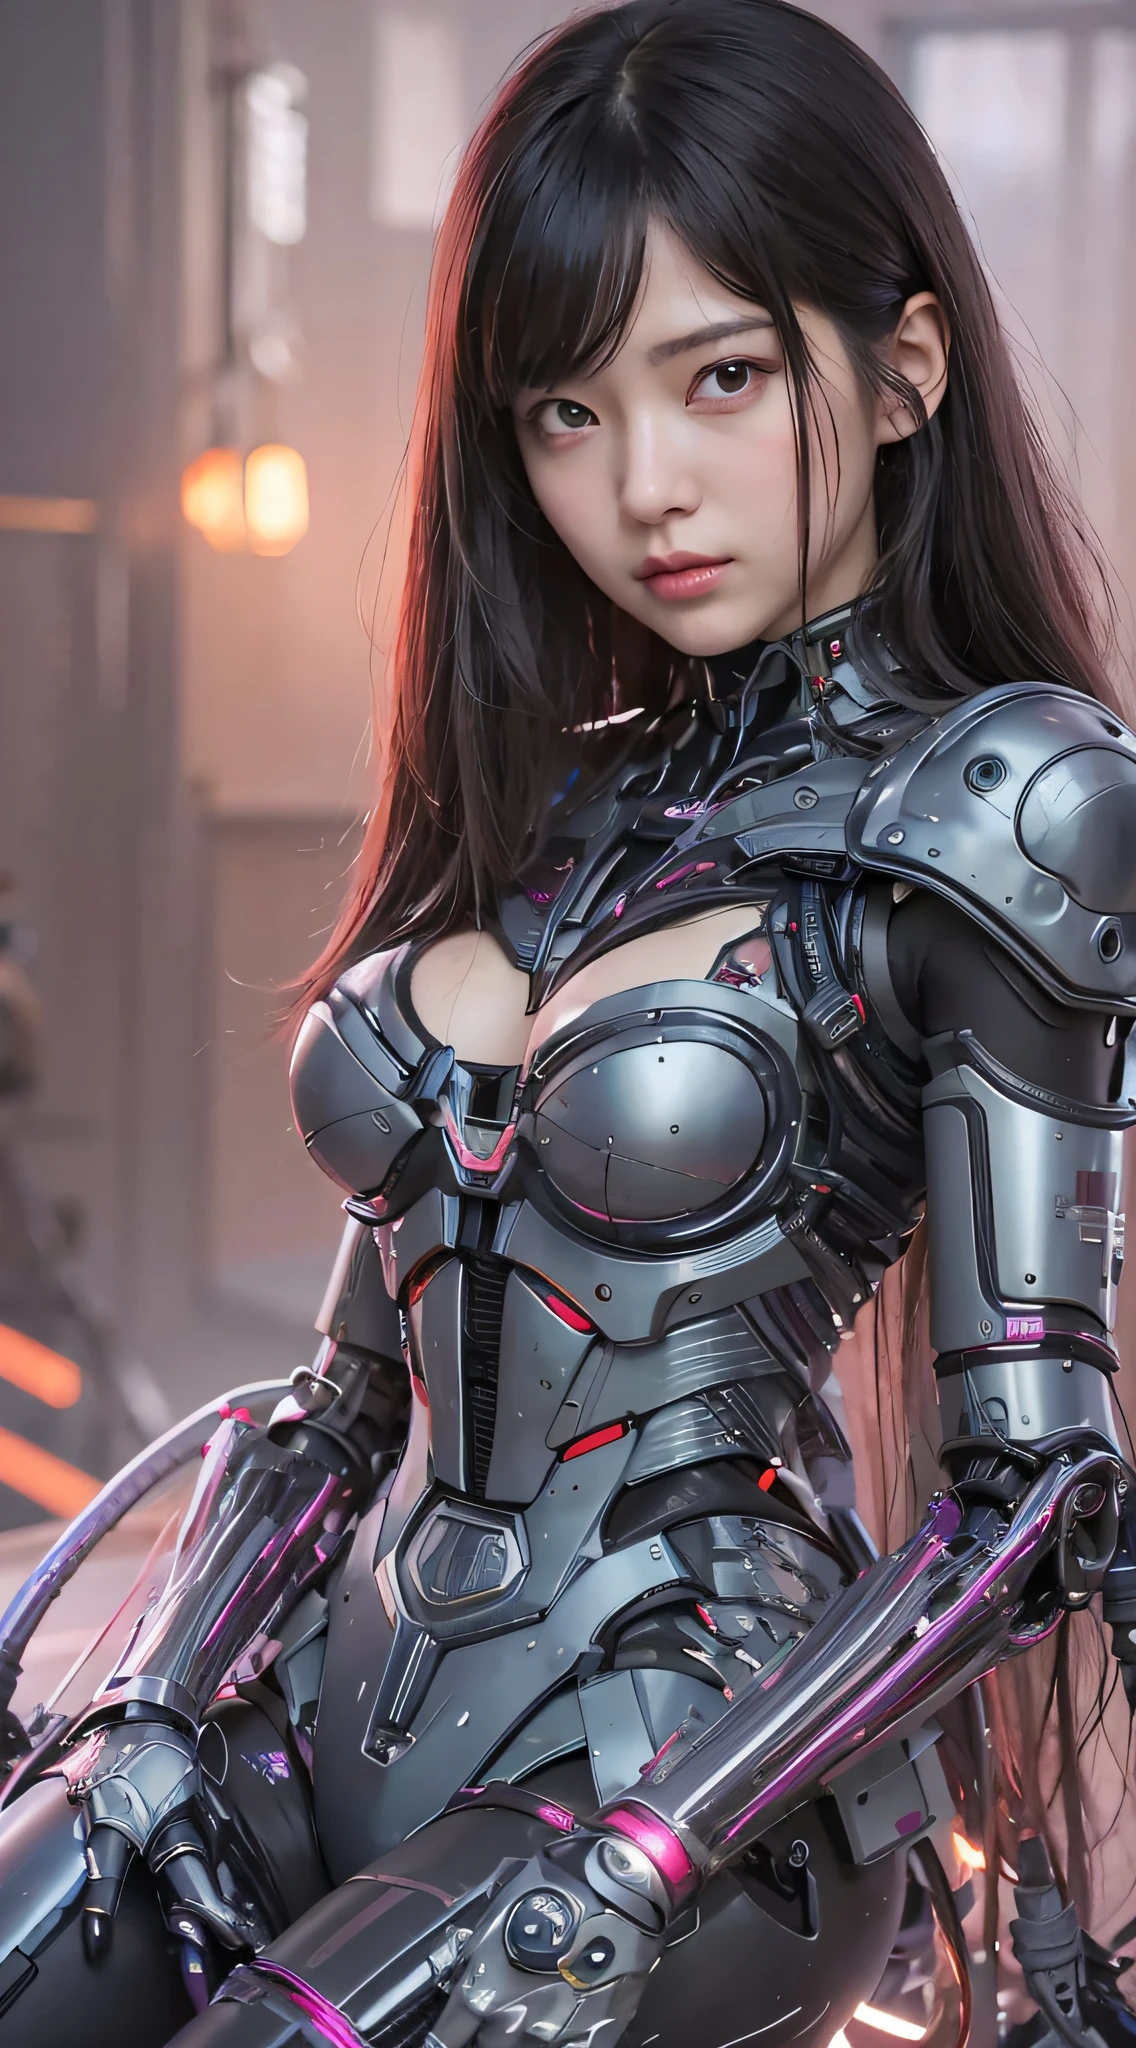 a close up of a woman in a futuristic suit with a gun, girl in mecha cyber armor, beautiful girl cyborg, Cyborg girl, Cute cyborg girl, Cyborg - Asian girl, cyberpunk anime girl mech, perfect anime cyborg woman, female cyberpunk anime girl, perfect android girl, an oppai cyberpunk, female cyborg, cyberpunk anime girl, cyberpunk beautiful girl, young lady cyborg